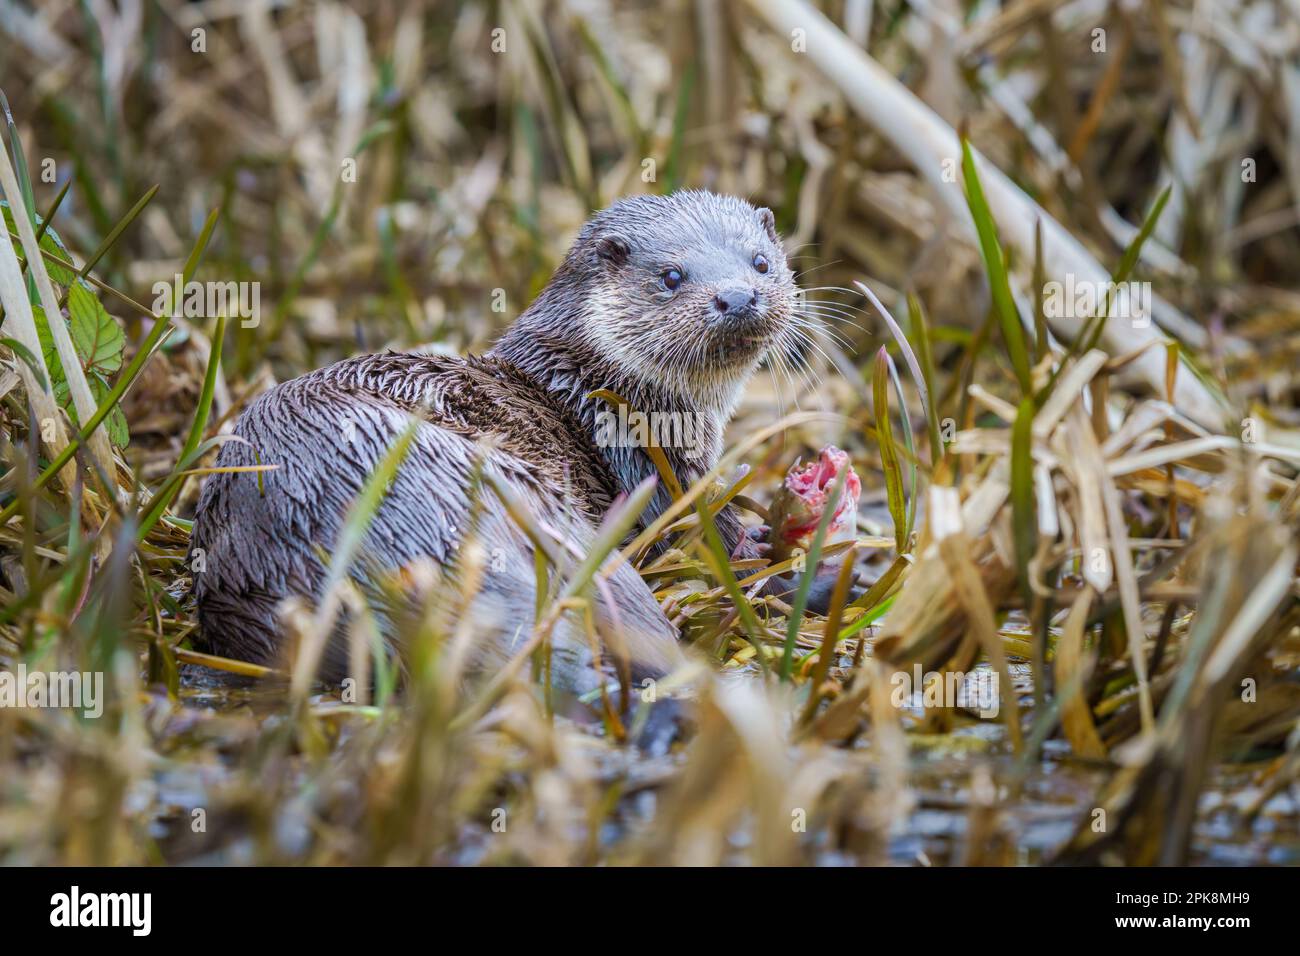 An otter (Lutra lutra) in the Stroudwater Canal in Cainscross, near Stroud, Gloucestershire. Stock Photo